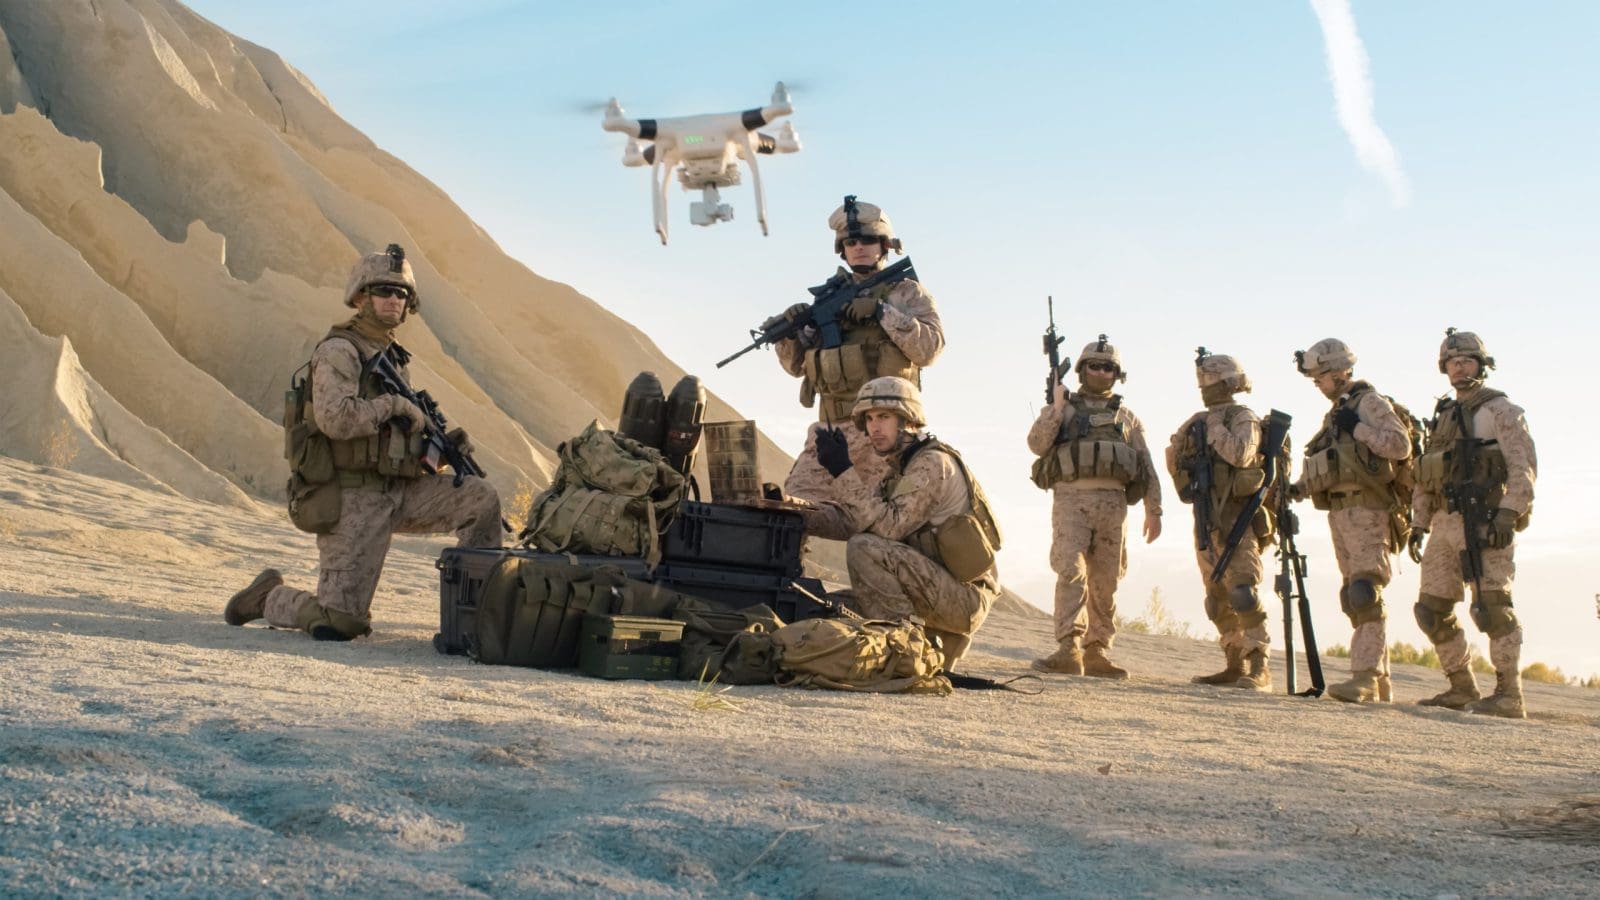 Military personnel engaged in drone warfare, operating a drone in a desert environment.